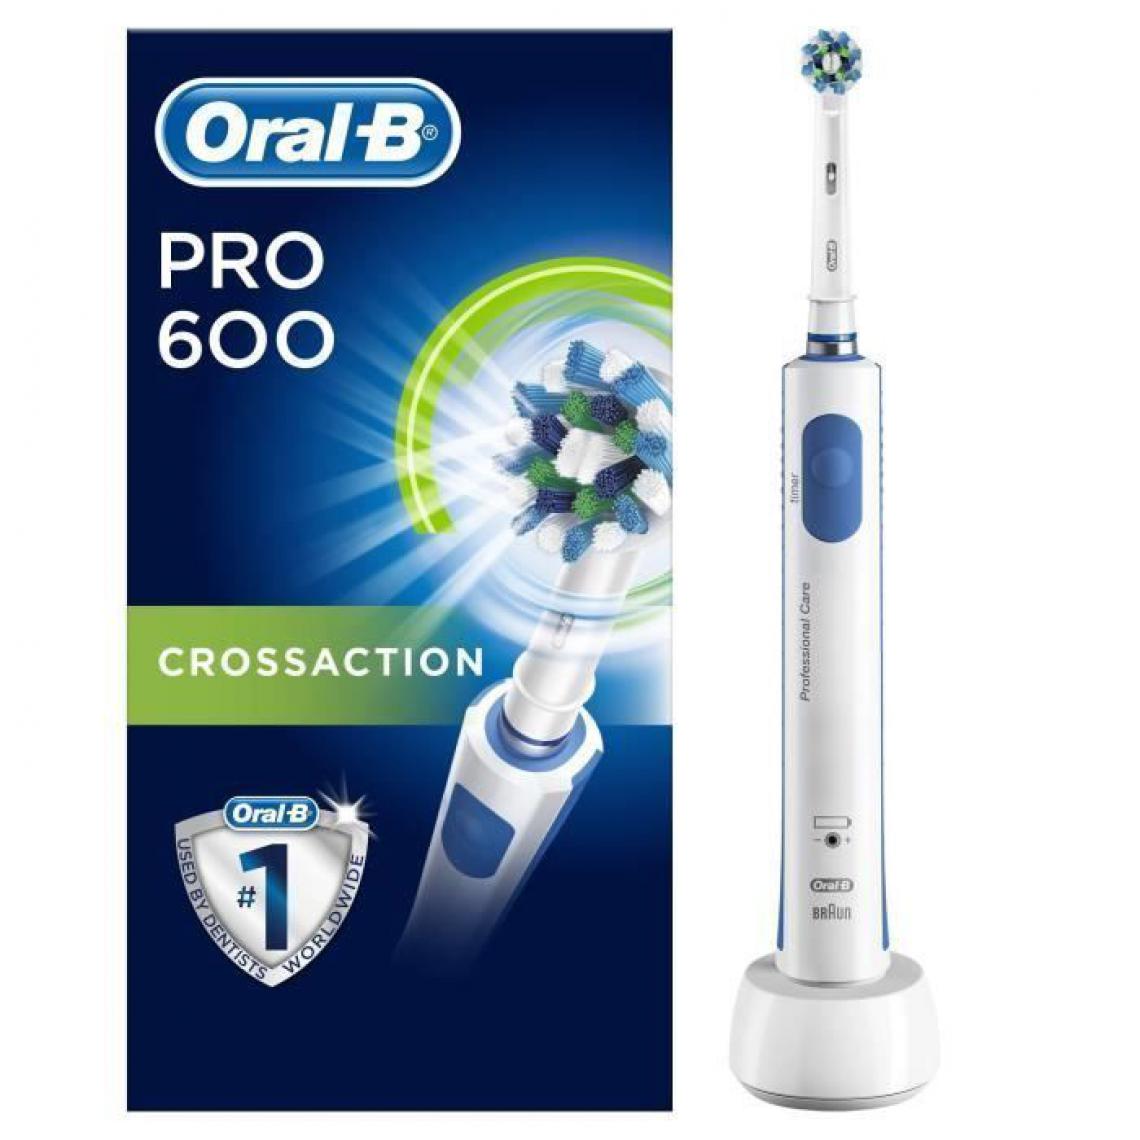 Oral-B - Oral-B PRO 600 Cross Action Brosse a dents électrique par BRAUN - Brosse à dents électrique